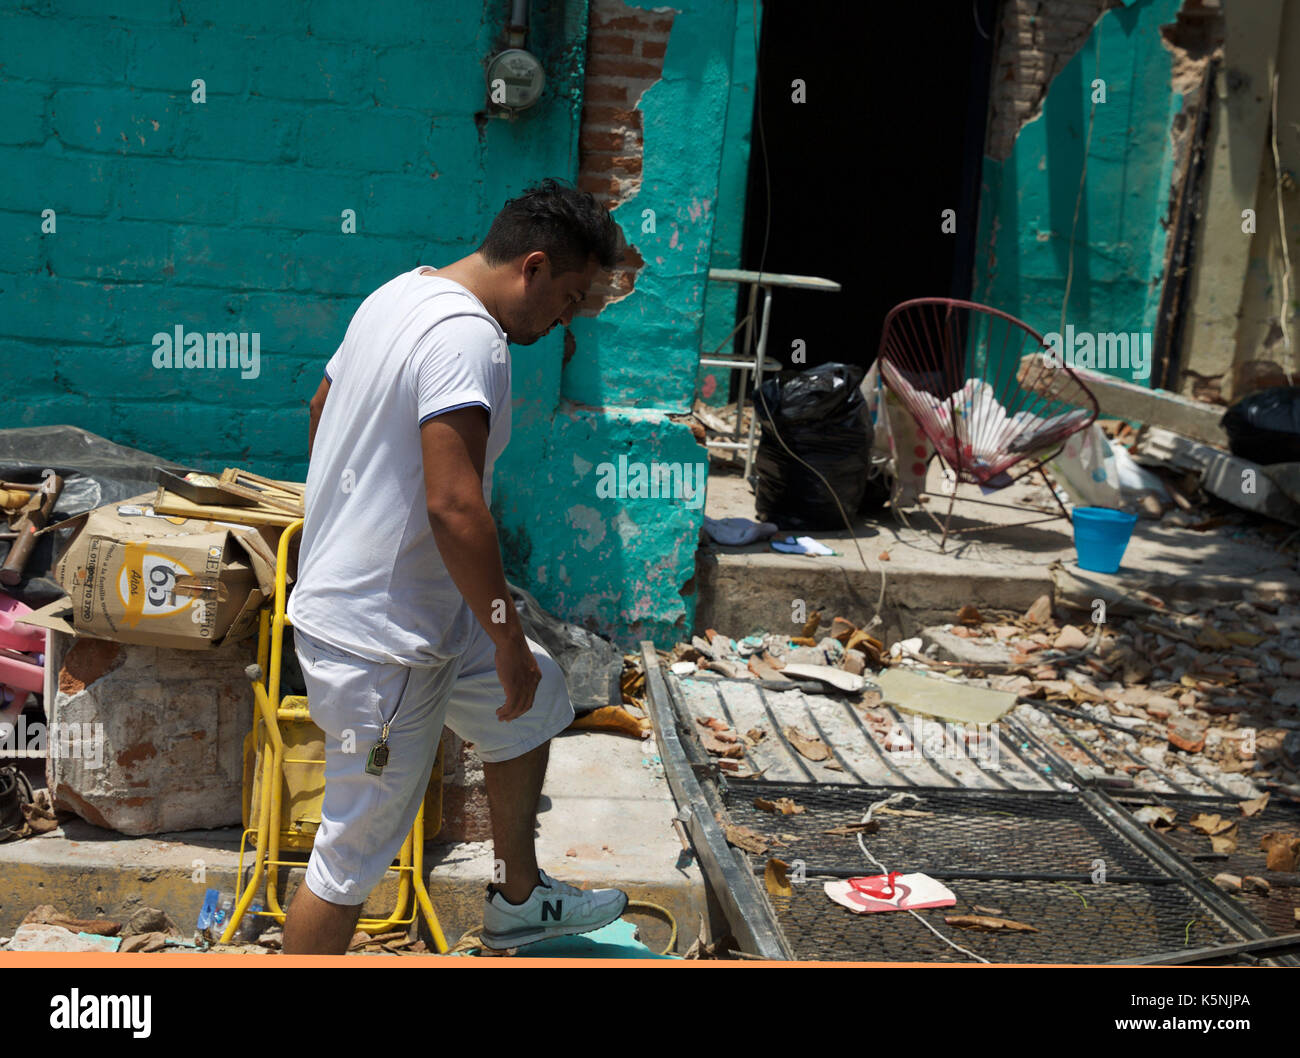 Juchitan, Mexico. 9th September, 2017. A local resident walks past a damaged house after an earthquake hit in Juchitan, Oaxaca state, Mexico, Sept. 9, 2017. A powerful earthquake measuring 8.2 on the Richter scale struck off Mexico's southern coast late Thursday night, killing 90 people. Credit: Xinhua/Alamy Live News Stock Photo